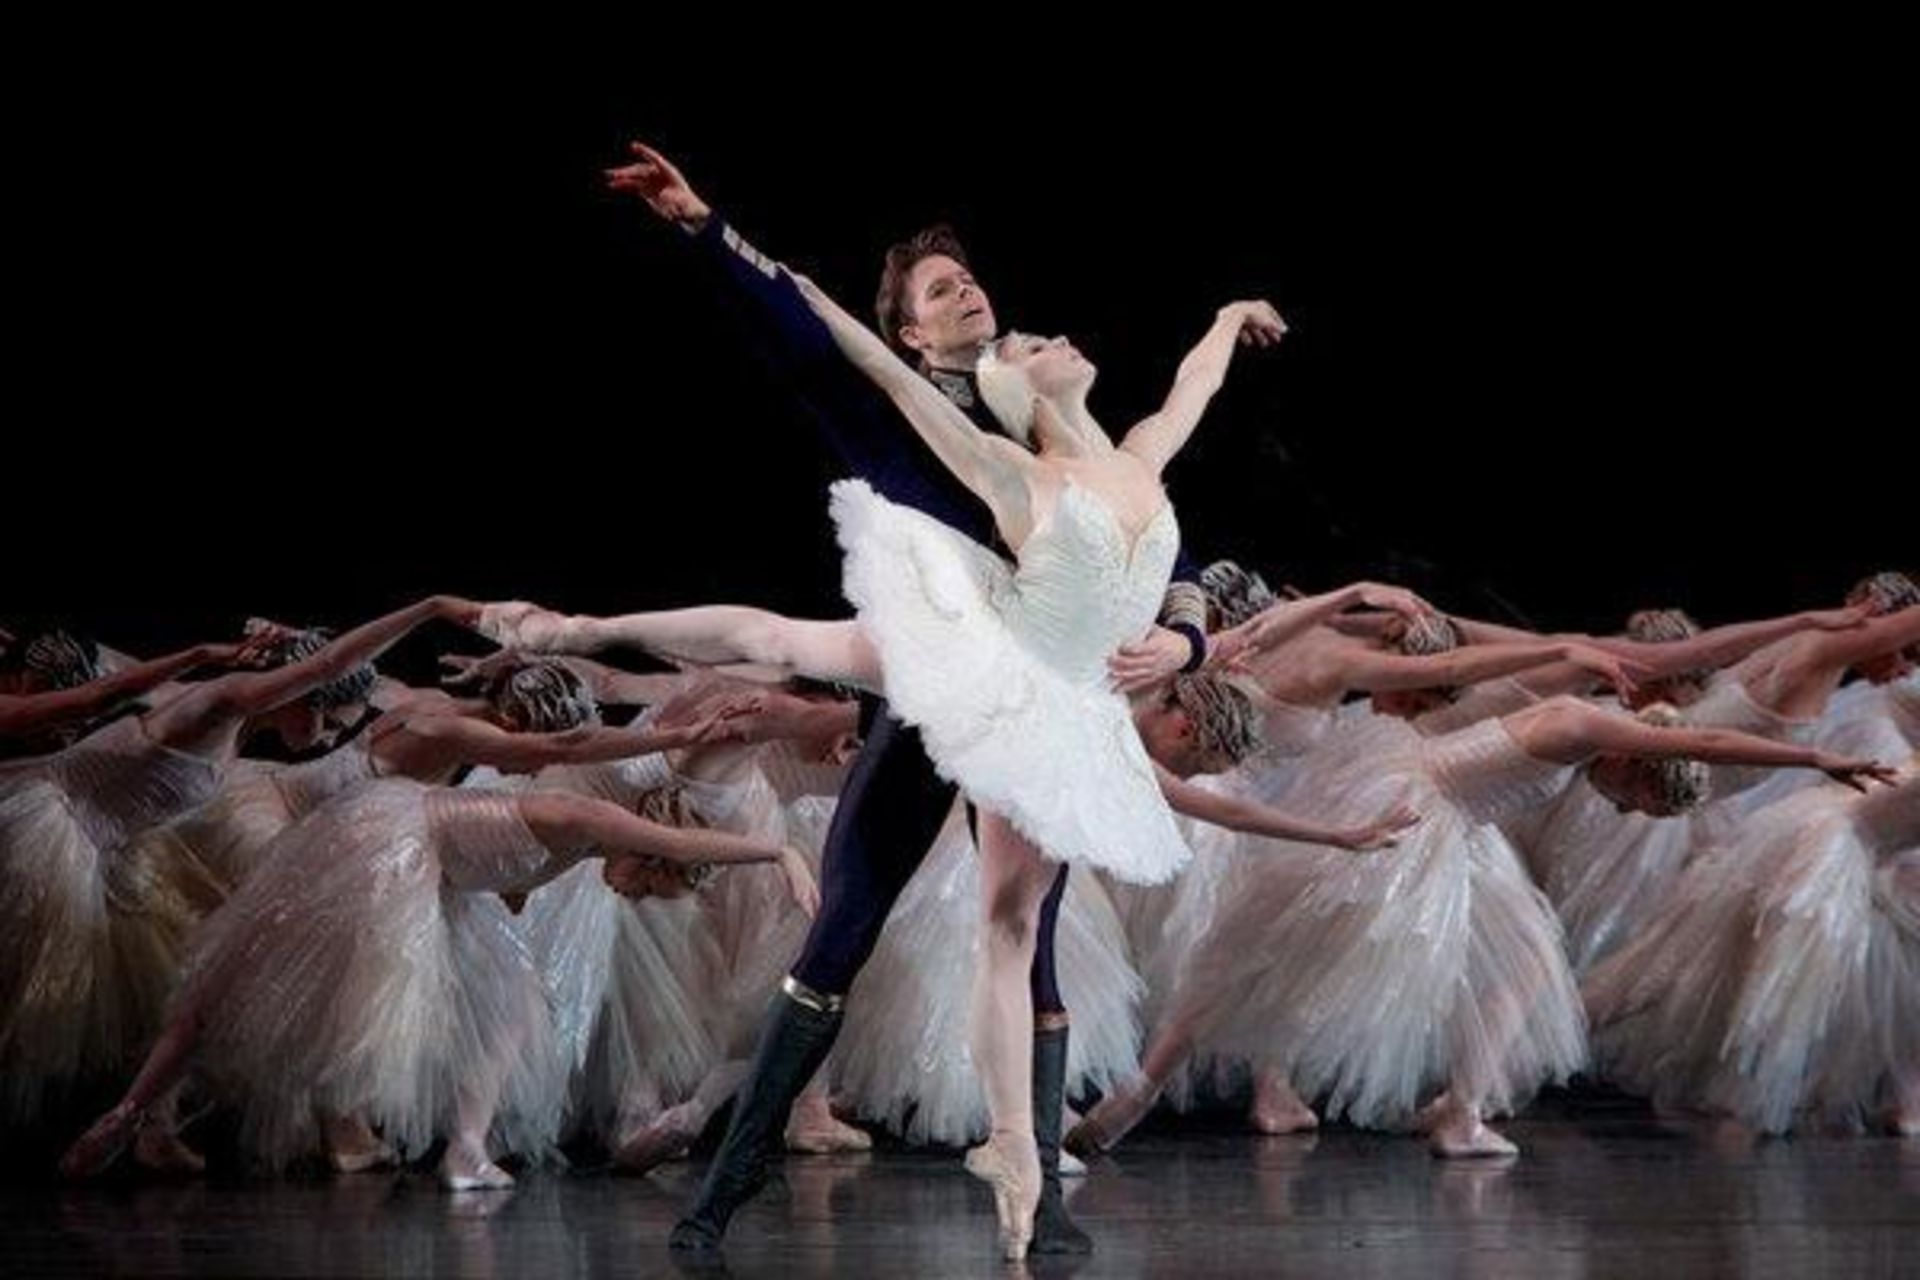 “The Wings Experience for 2” seats in the wings for a special ballet at The Royal Opera House